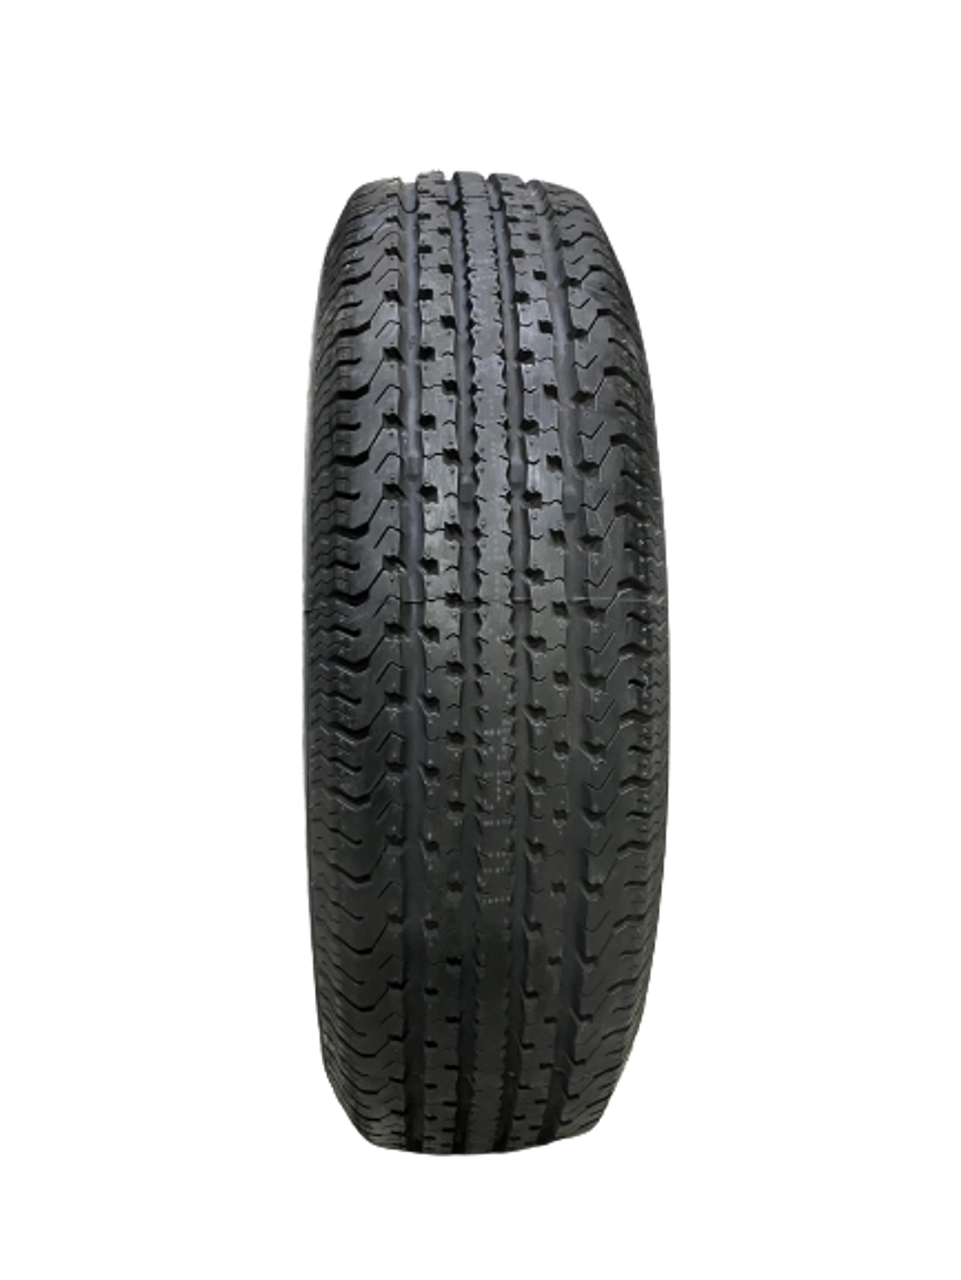 New Tire 175 80 13 Westlake ST100 8 Ply ST175/80R13 Trailer